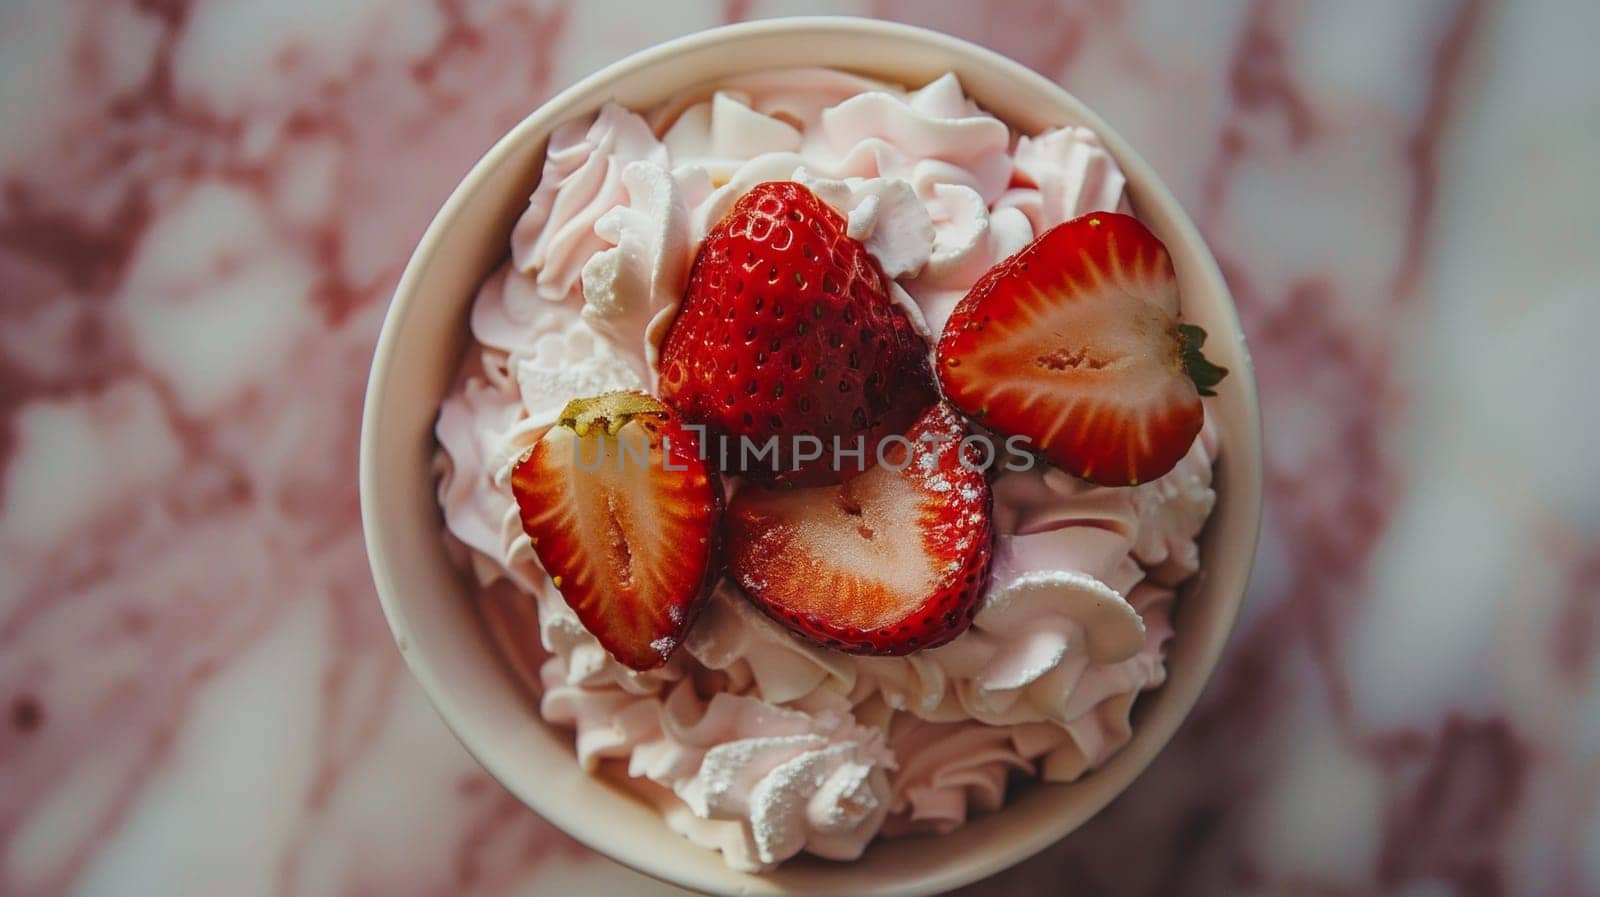 A bowl of strawberries and whipped cream on a white plate